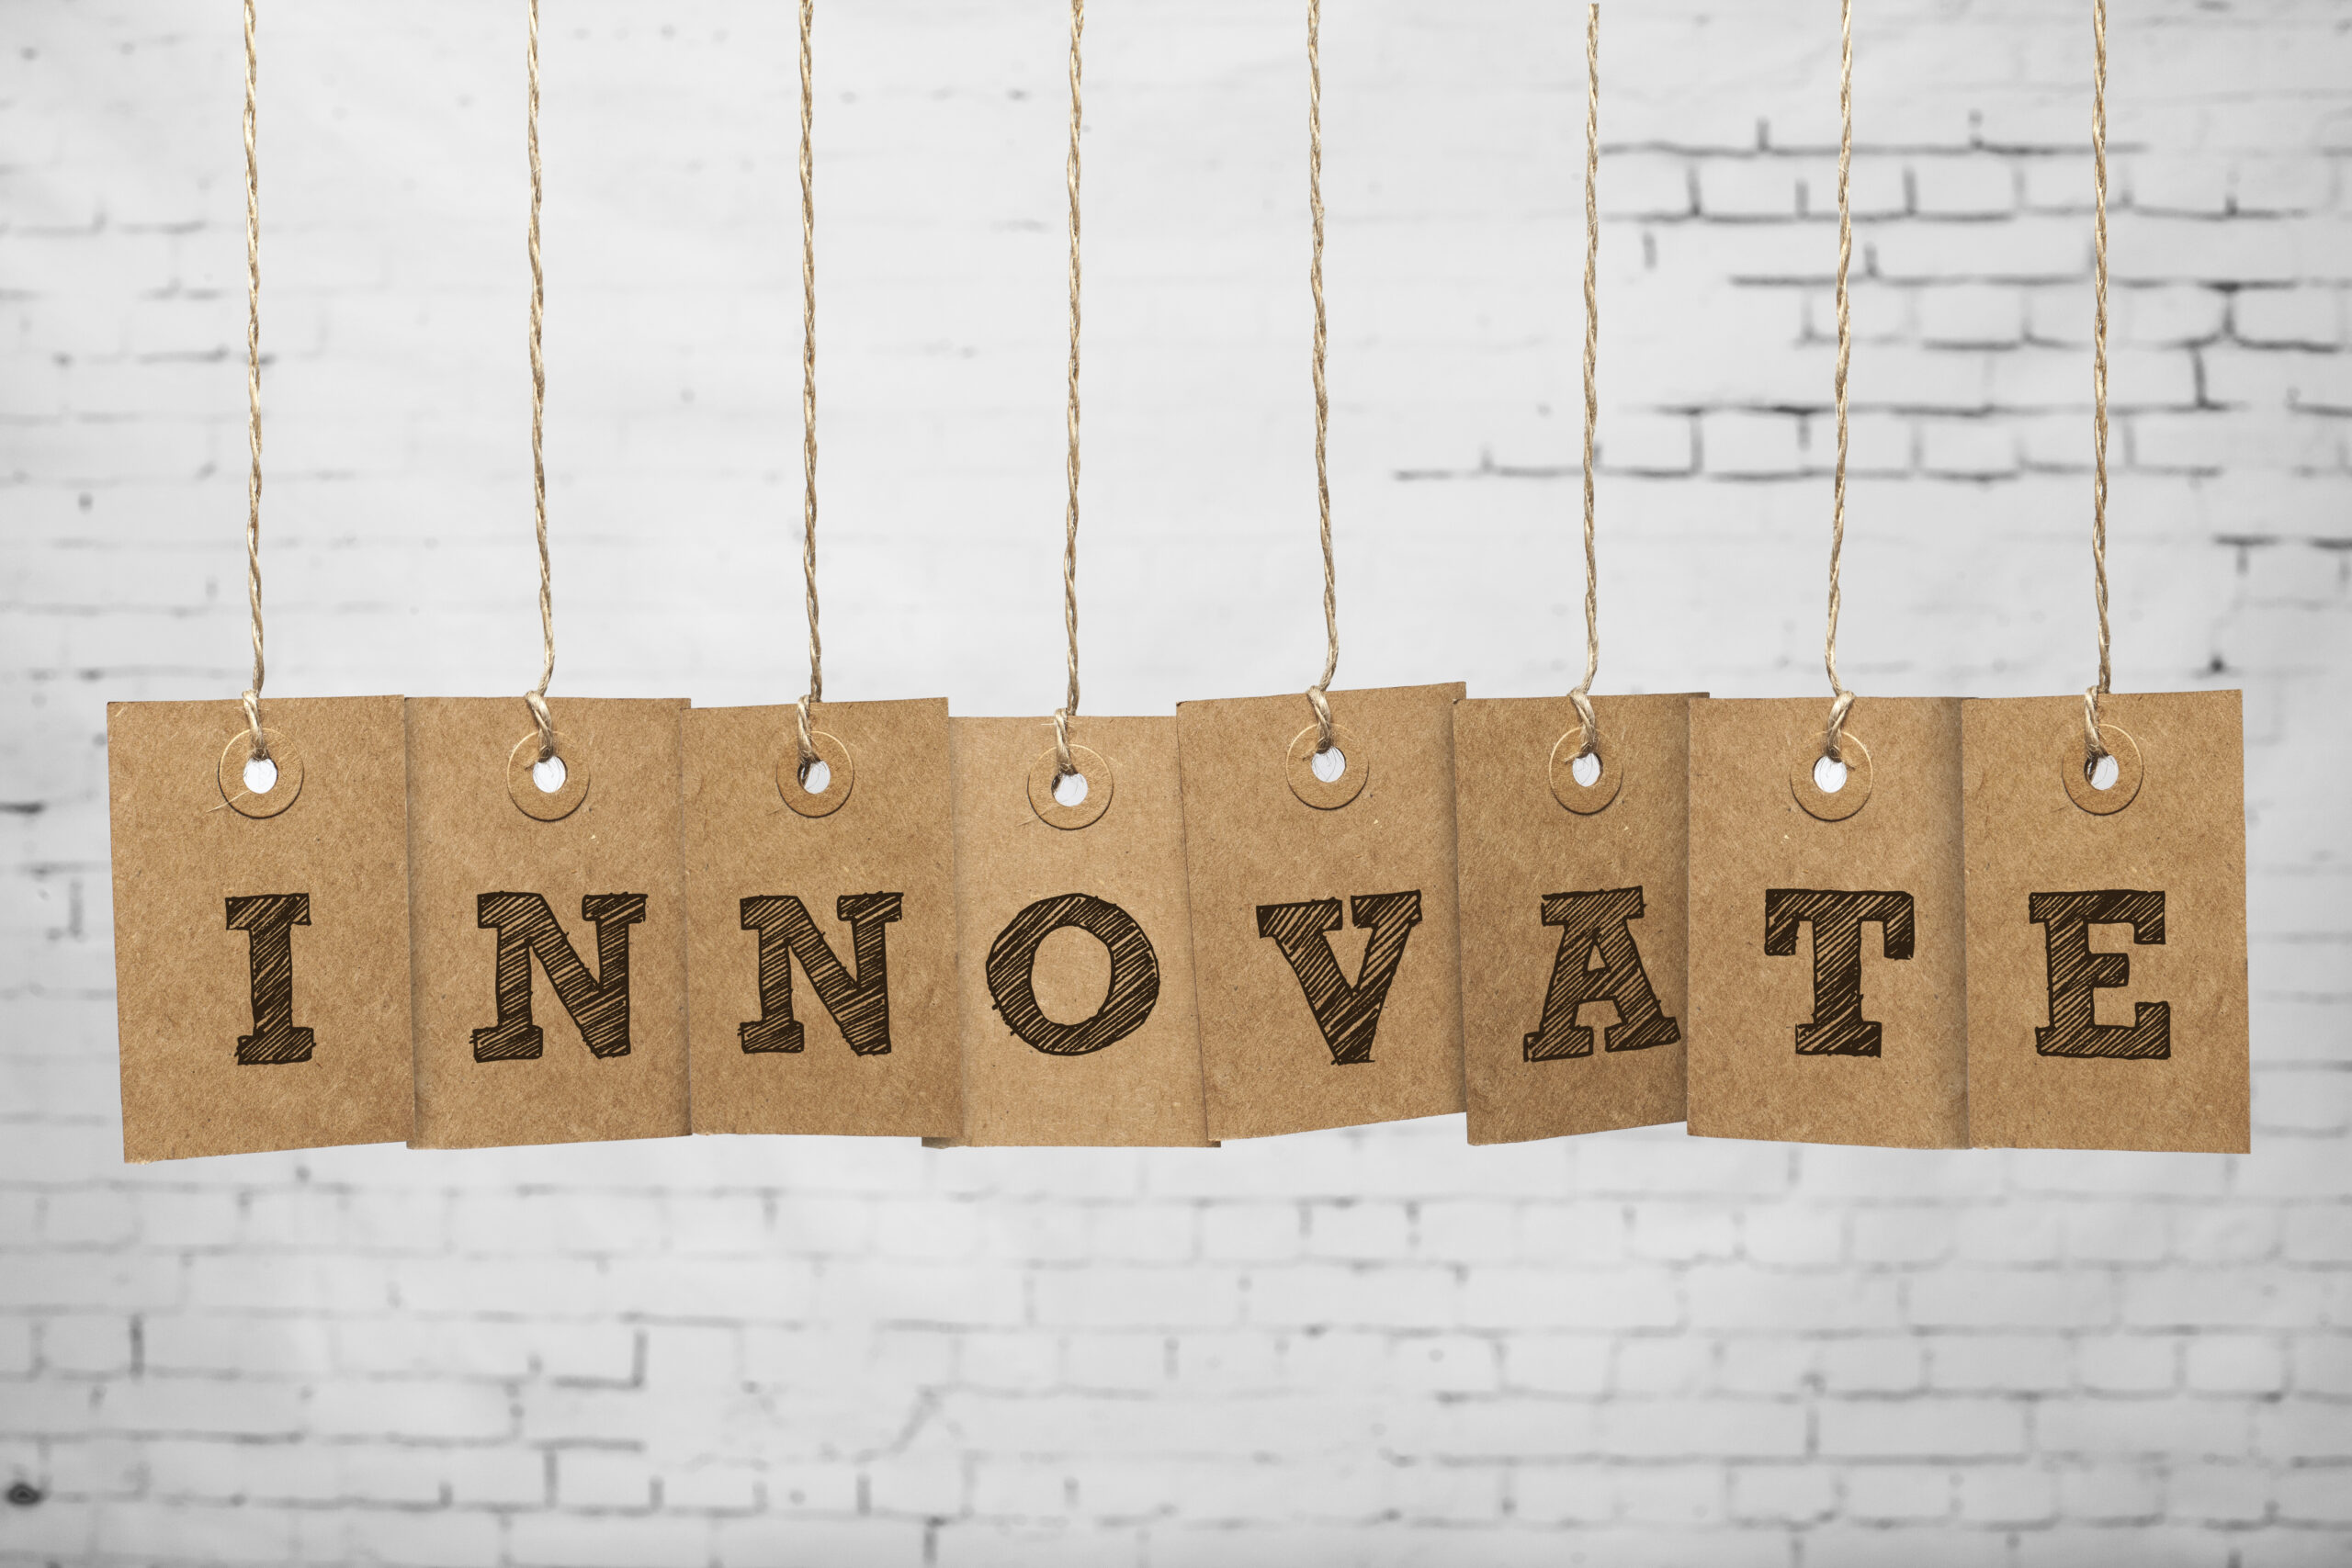 Innovation starts with facilities managers and other leaders of the organization